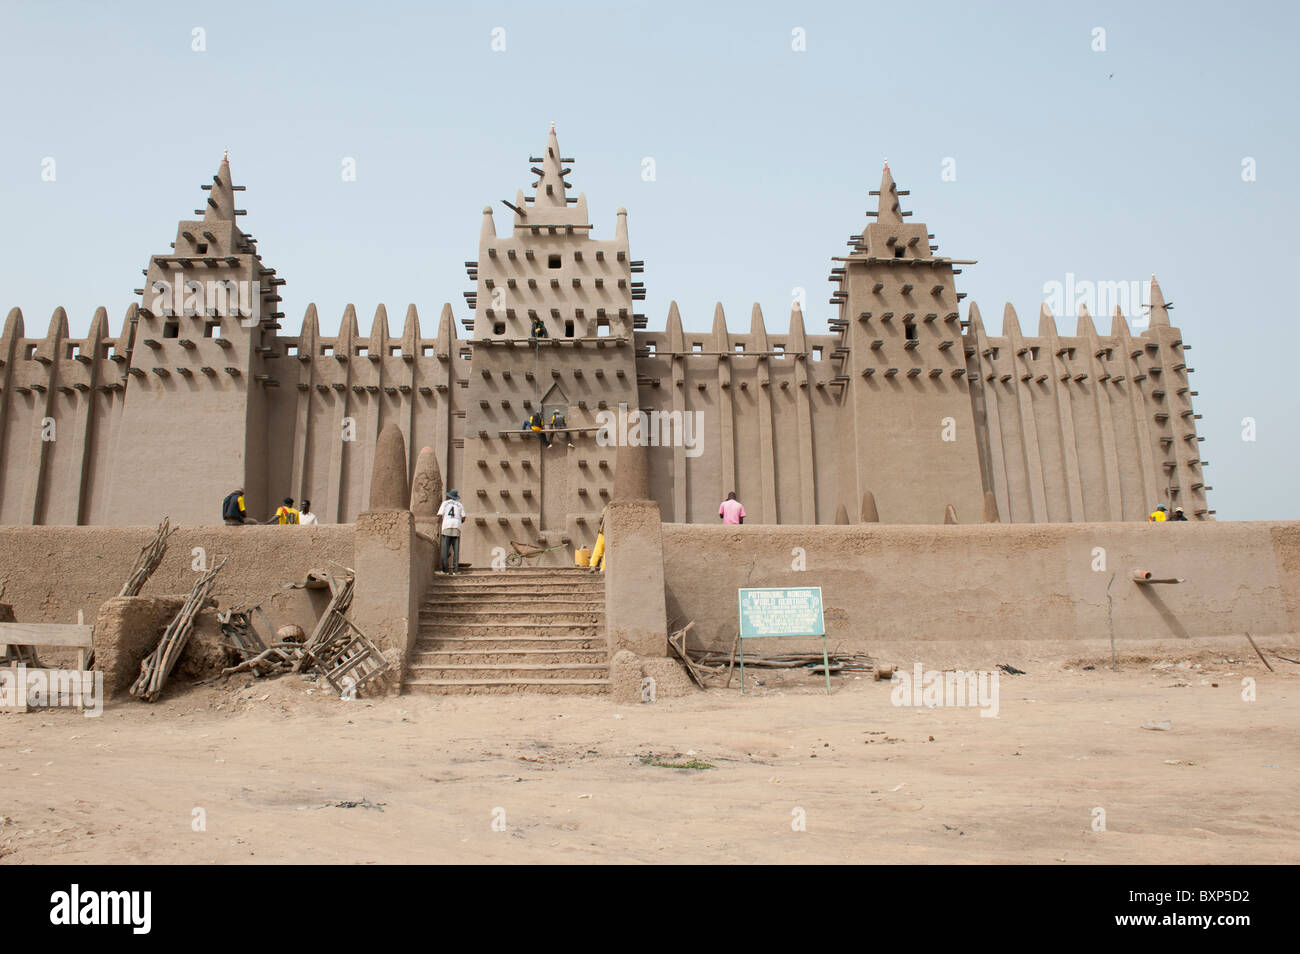 Workers of the 'Aga Khan Trust for Culture' repairing the plasterwork of the Great  Mosque of Djenné, Mali Stock Photo